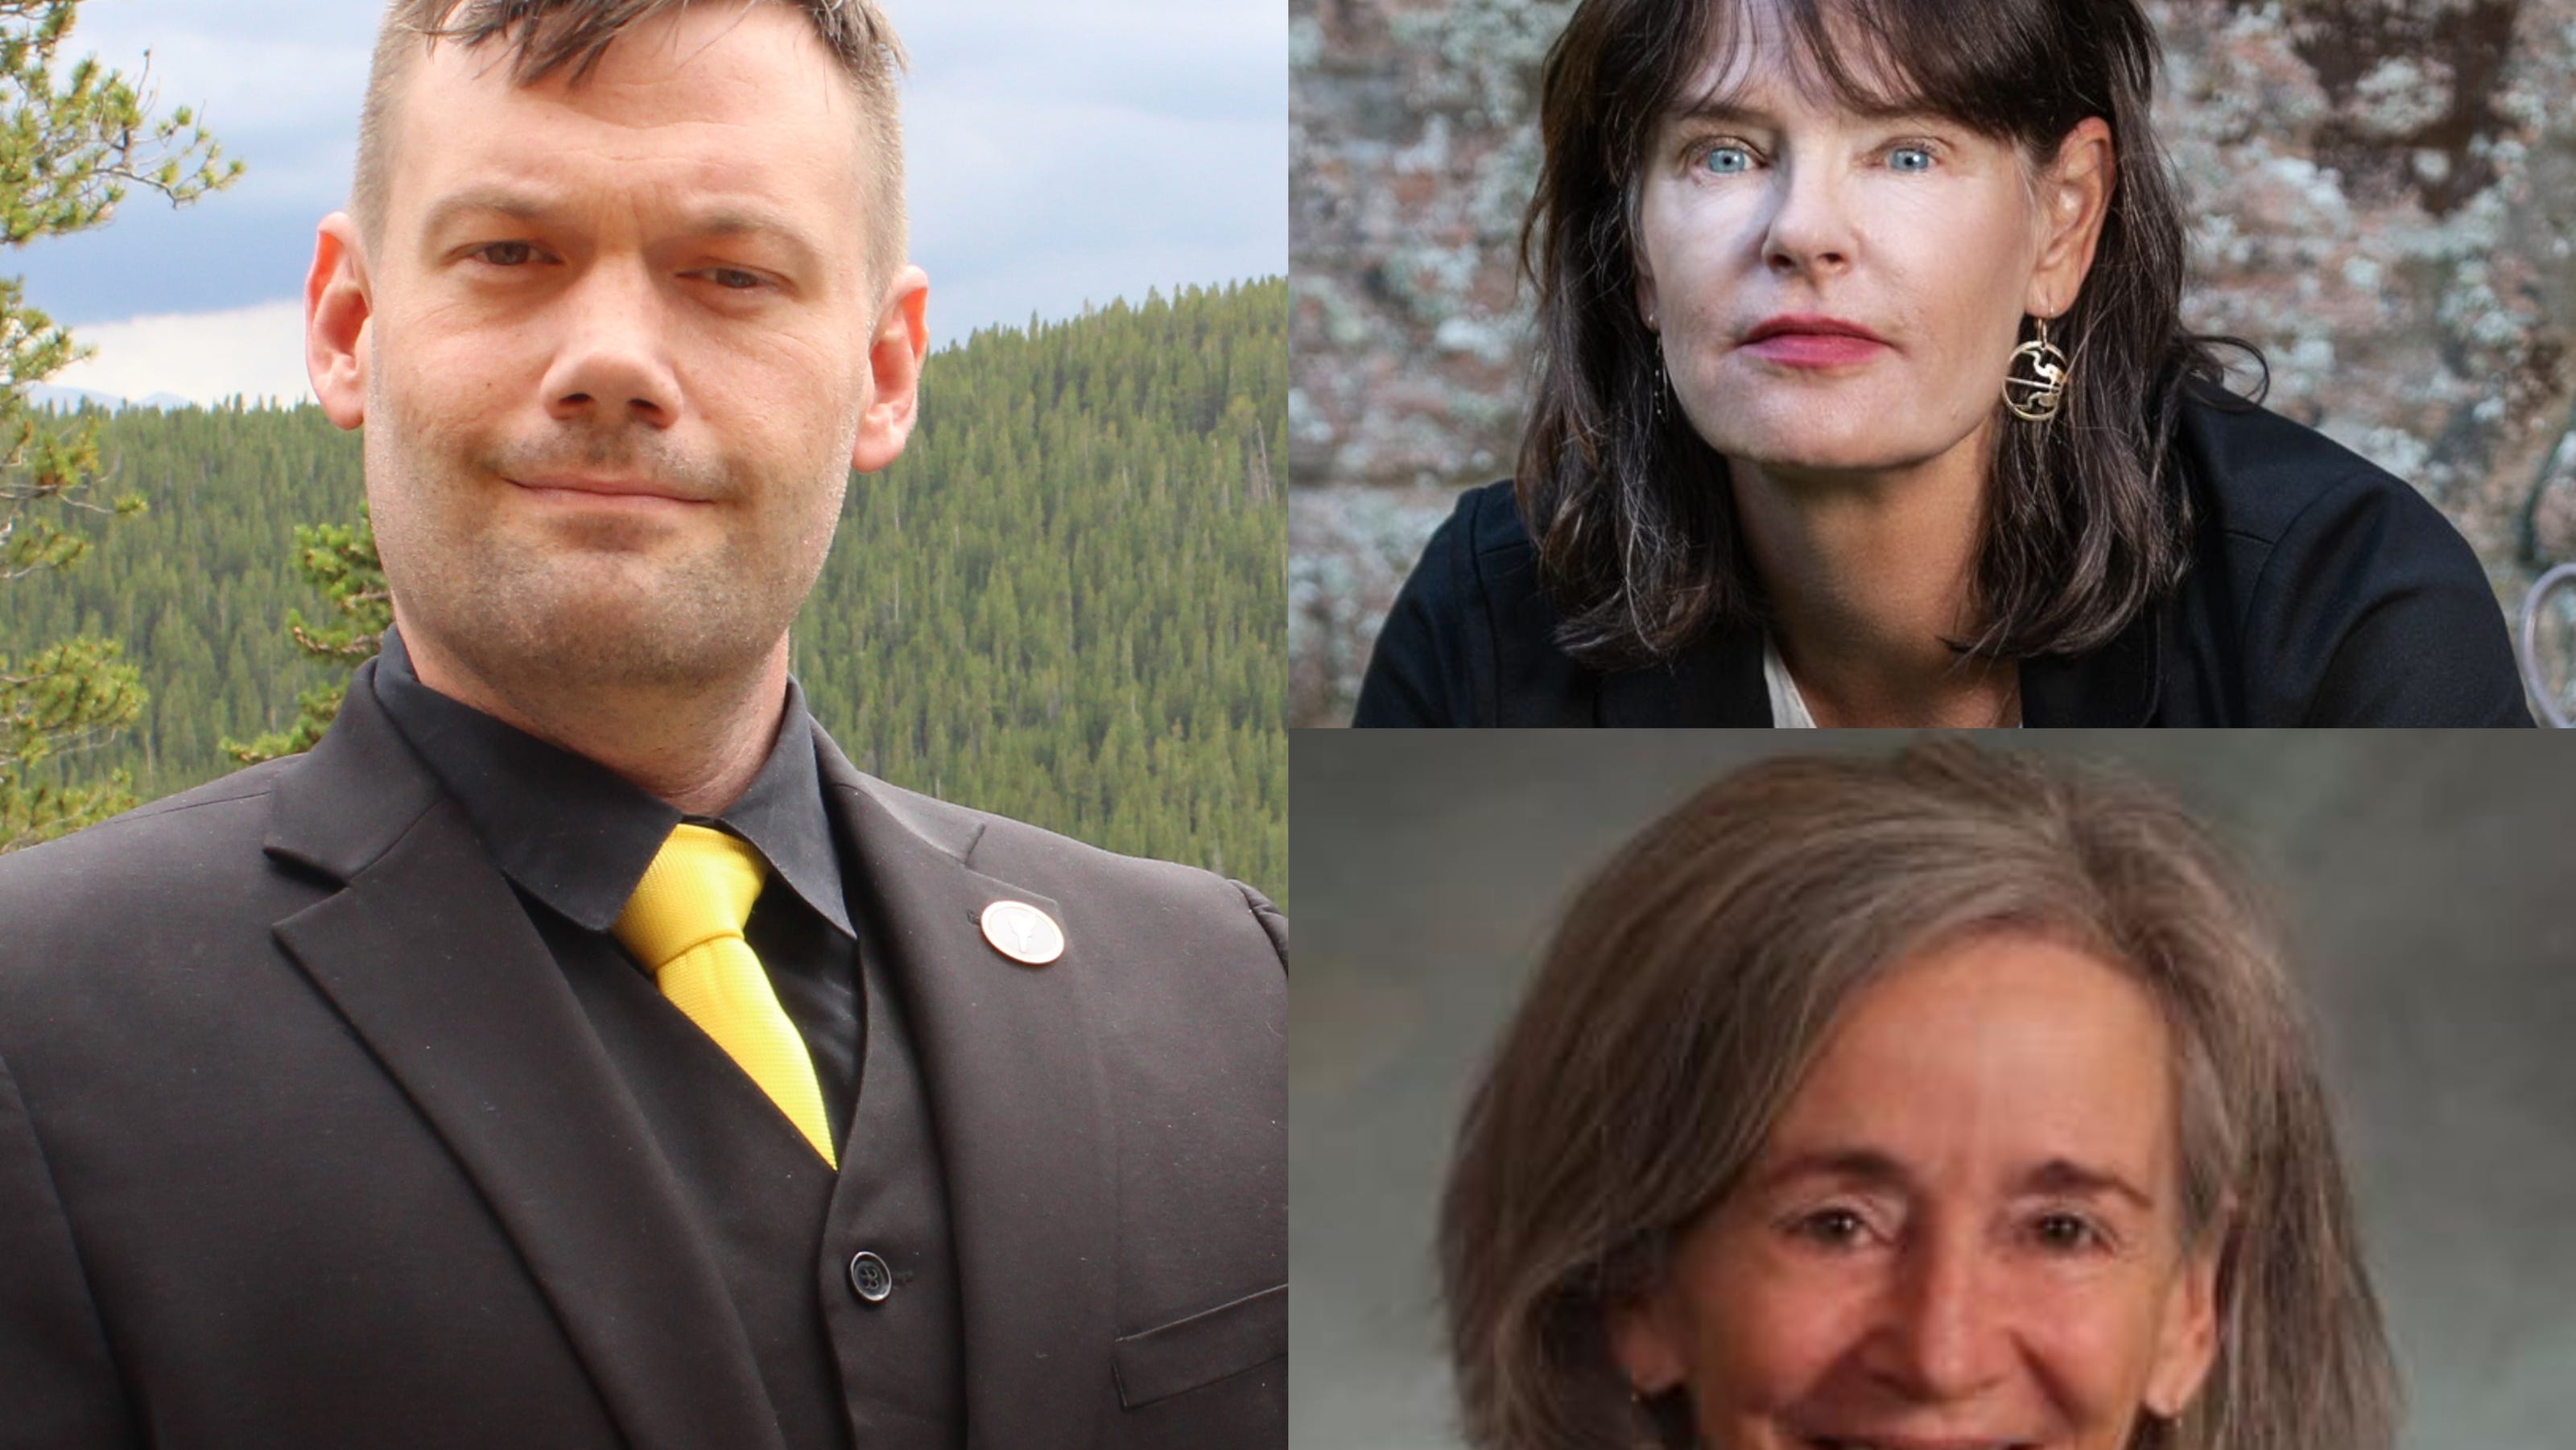 Colorado House District 49 election: Mental health, drug issues dominate